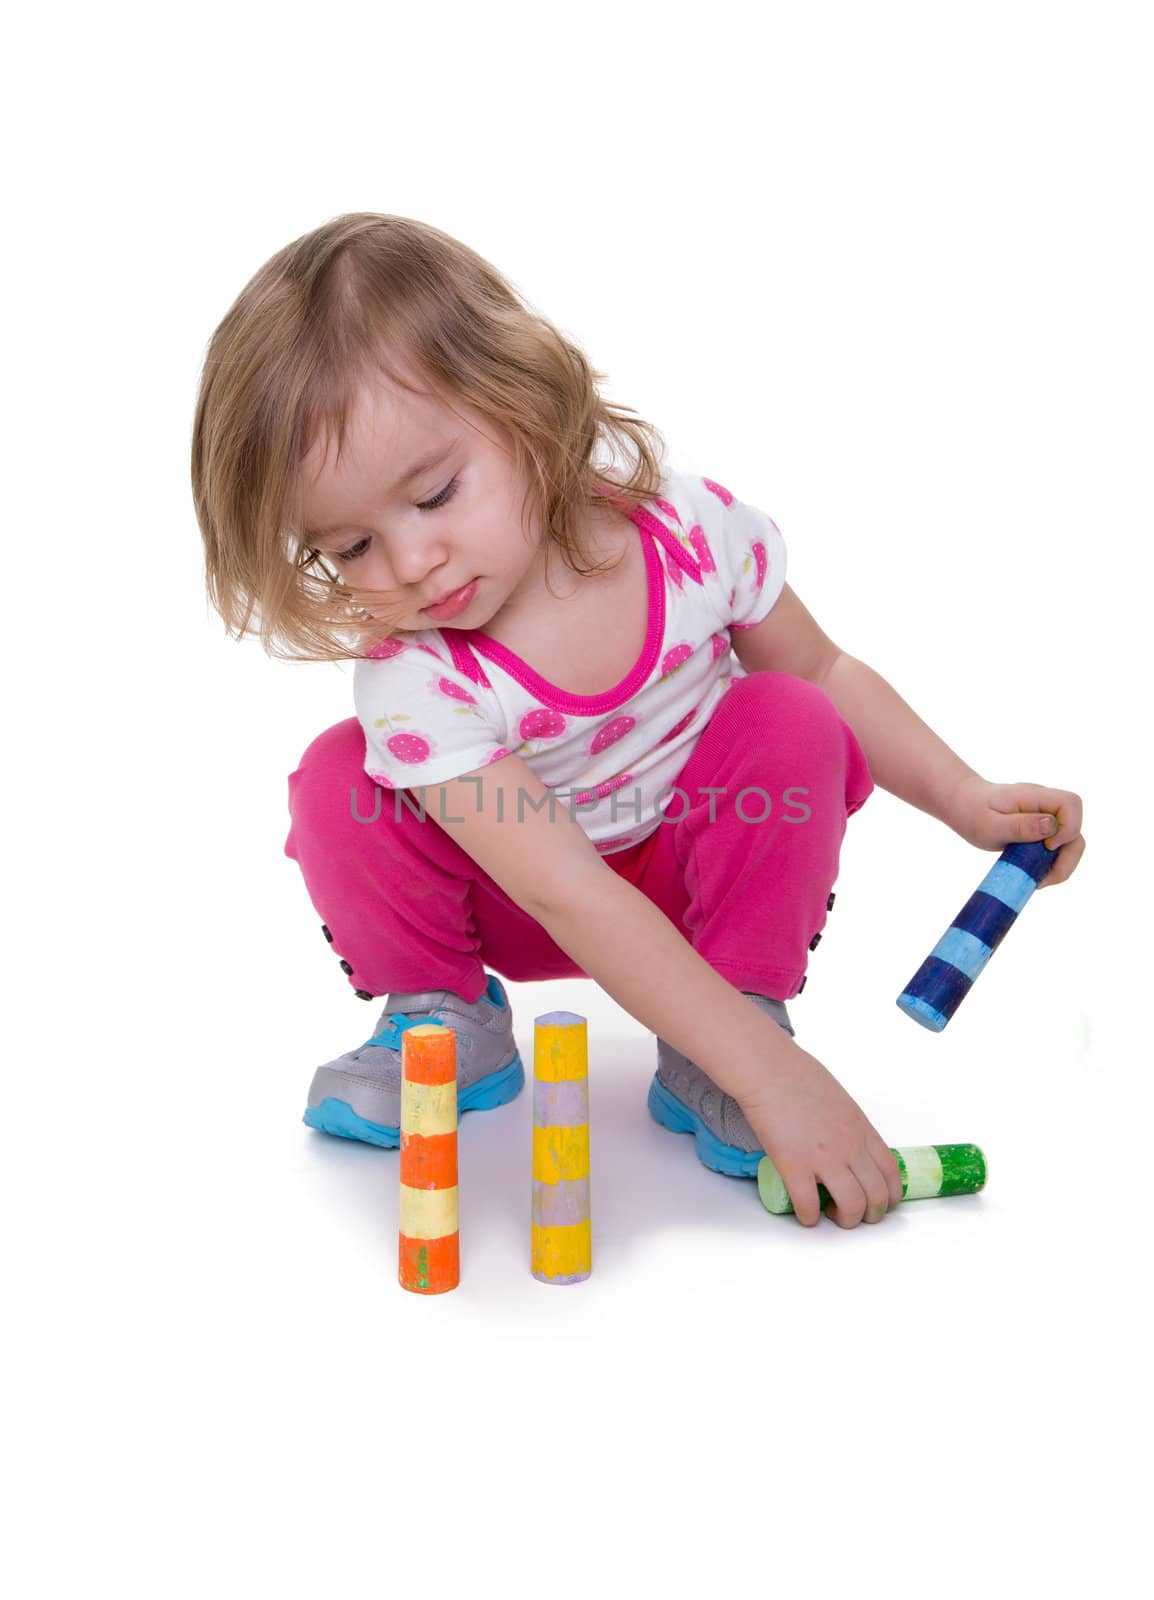 Toddler learning skills by paying attention to colorful crayons. Isolated on white with copy space.